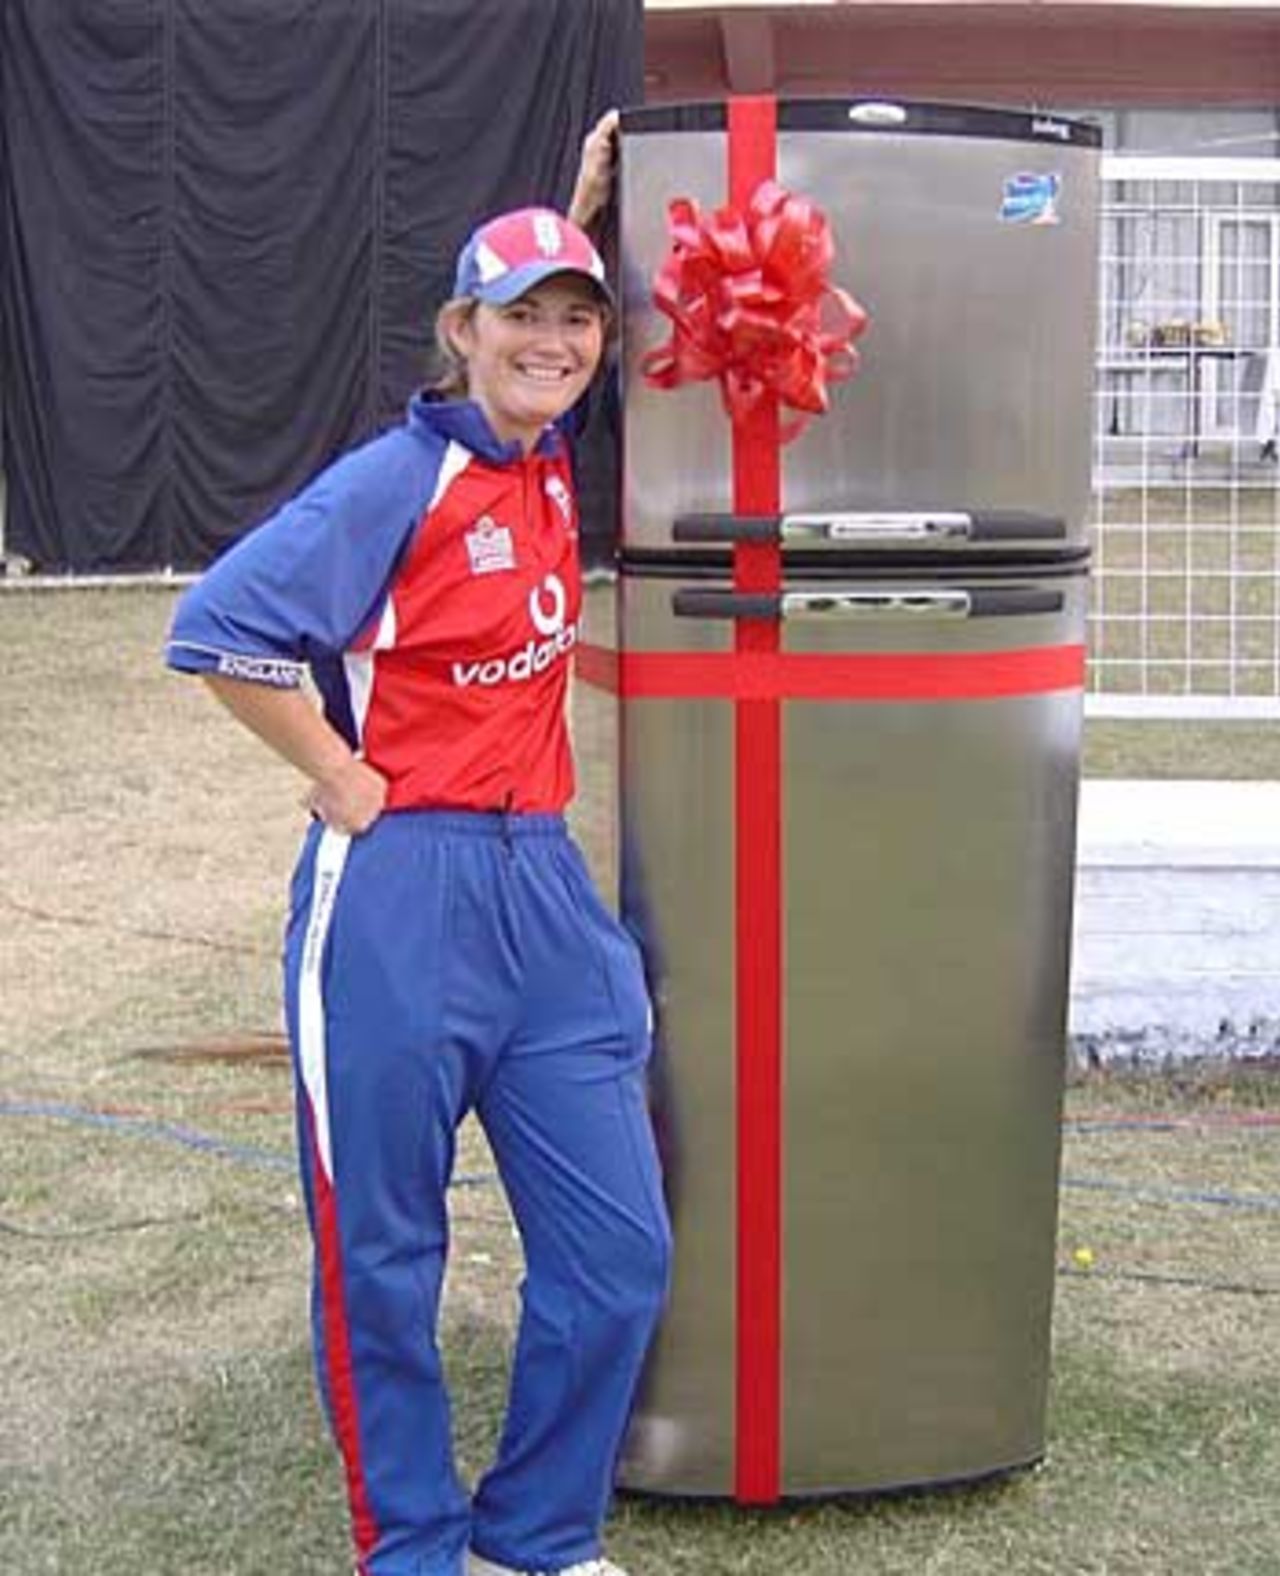 Charlotte Edwards and her fridge freezer, after winning the Player-of-the-Match award, November 27, 2005